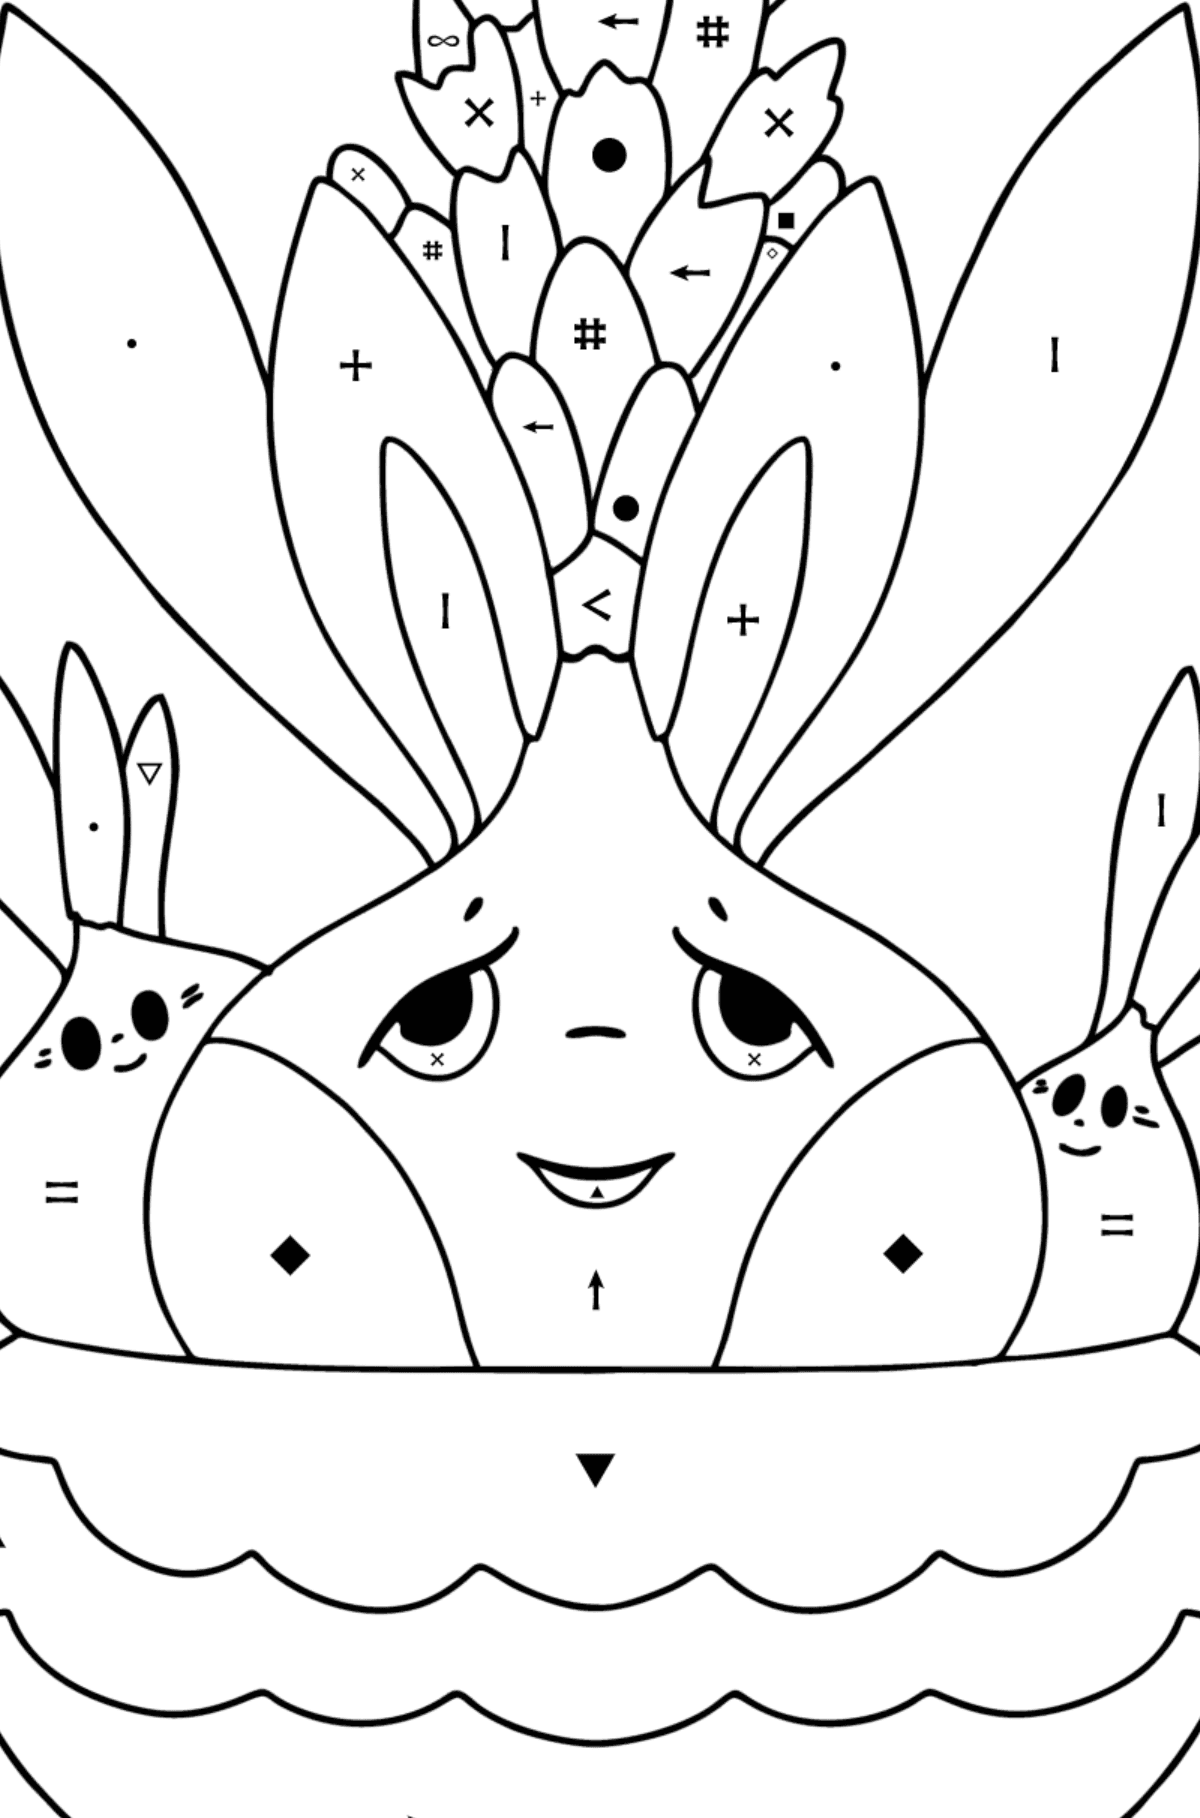 Hyacinth flowers with eyes coloring page - Coloring by Symbols for Kids